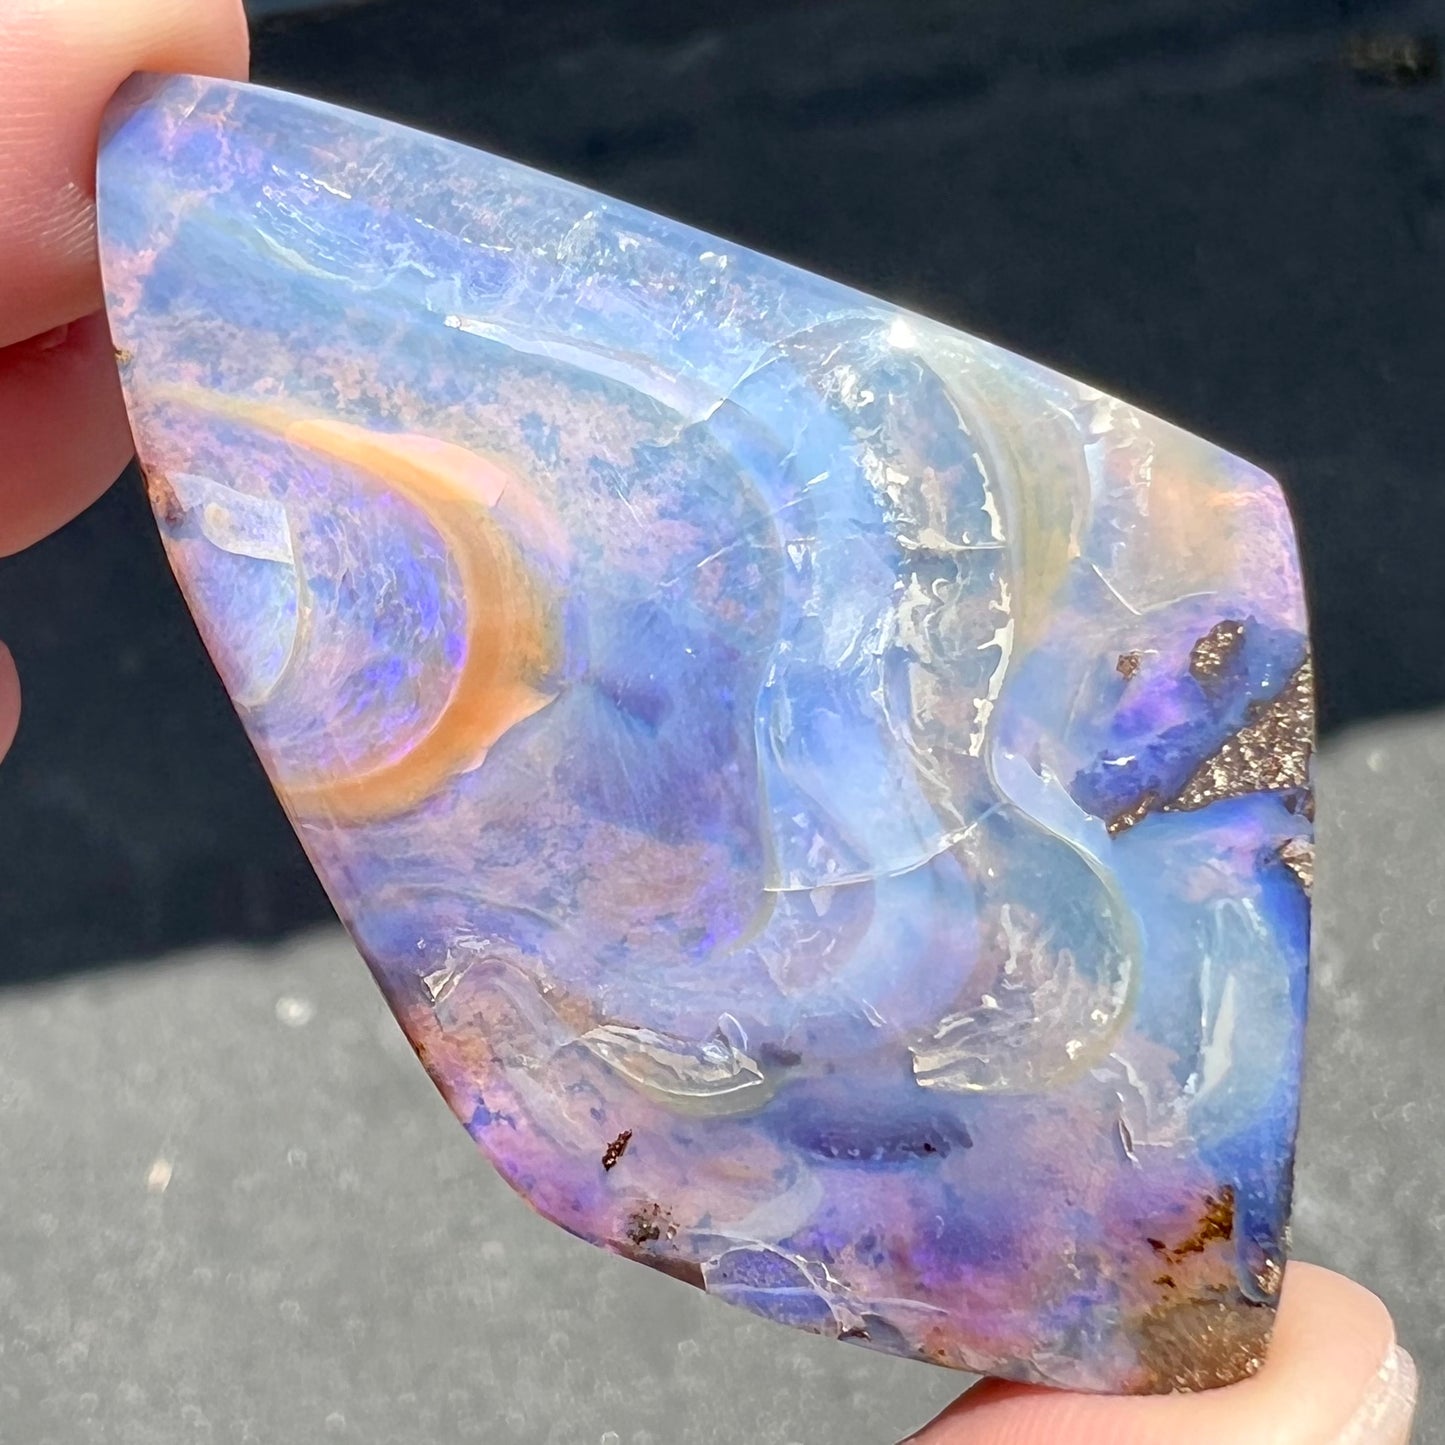 A polished, purple Quilpie boulder opal stone from Queensland, Australia.